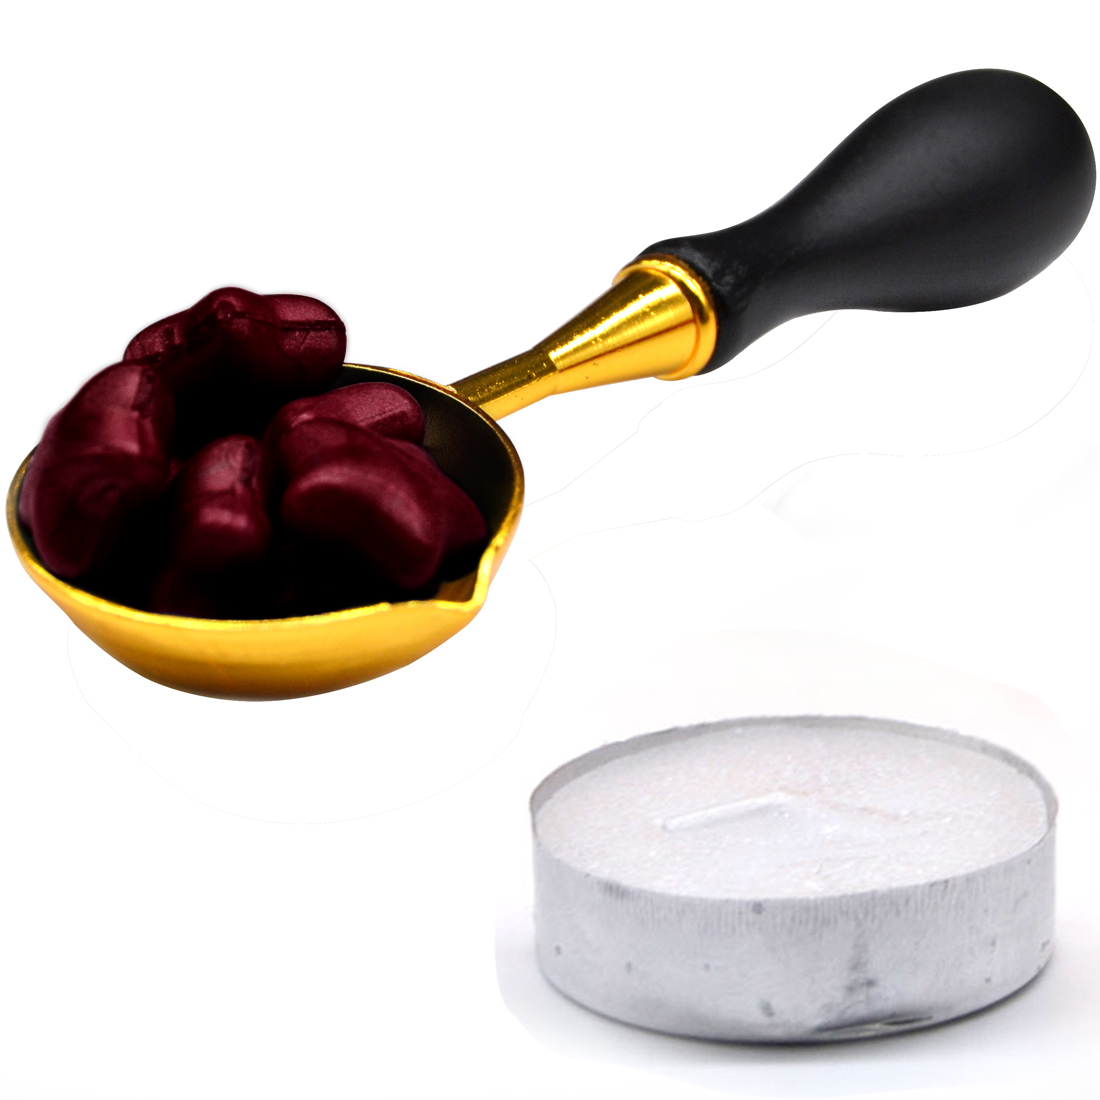 What materials are needed to play wax seal?